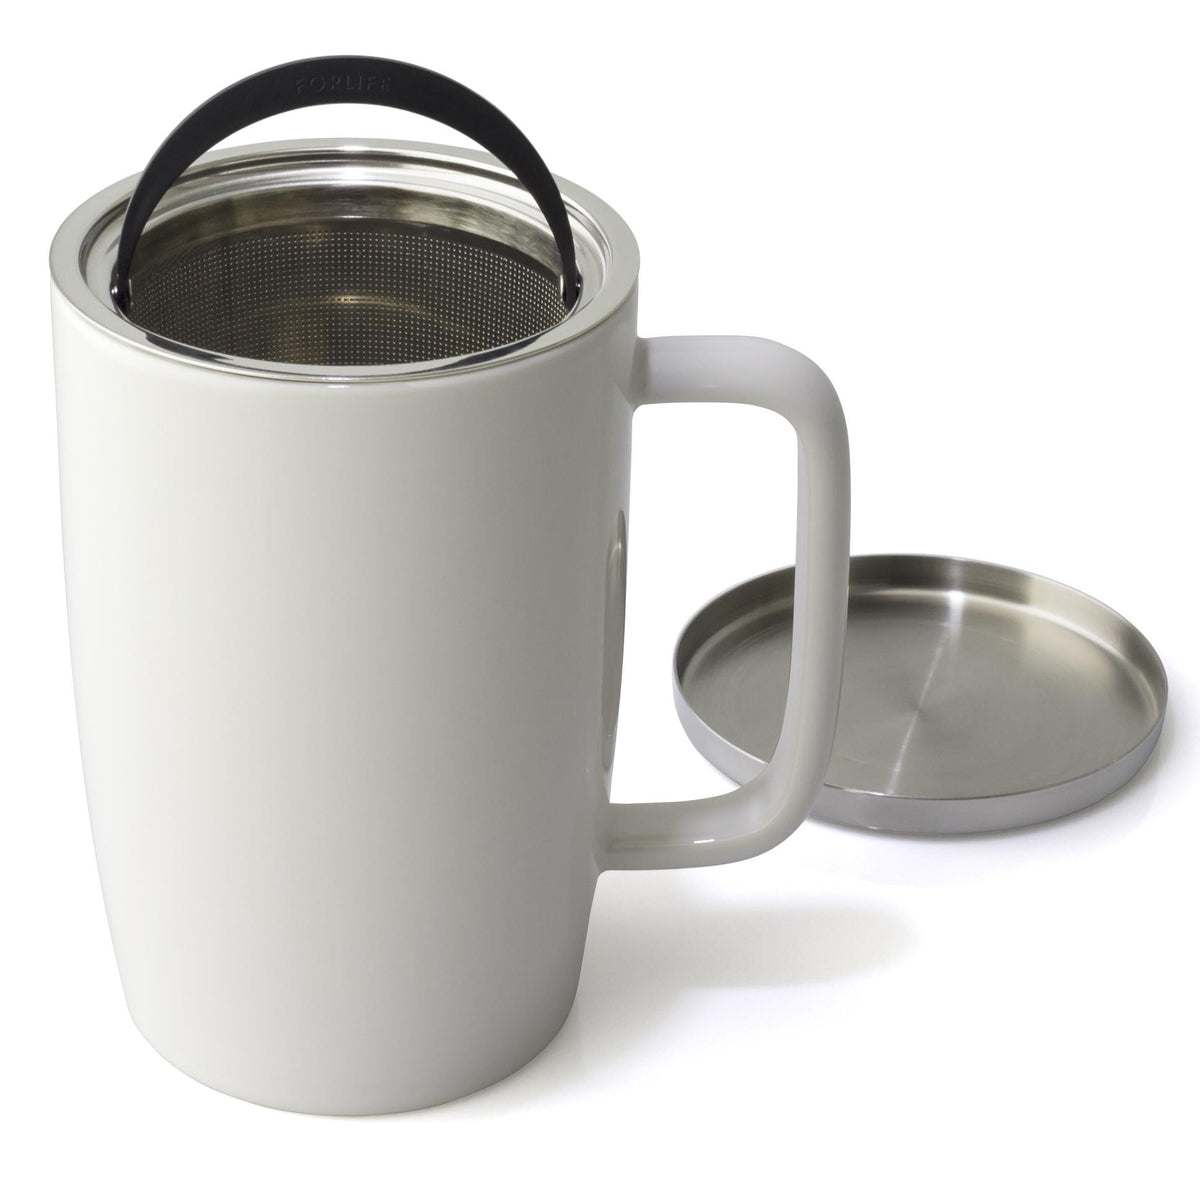 FORLIFE Mug With Basket Infuser and Stainless Steel Lid : Glossy Blue